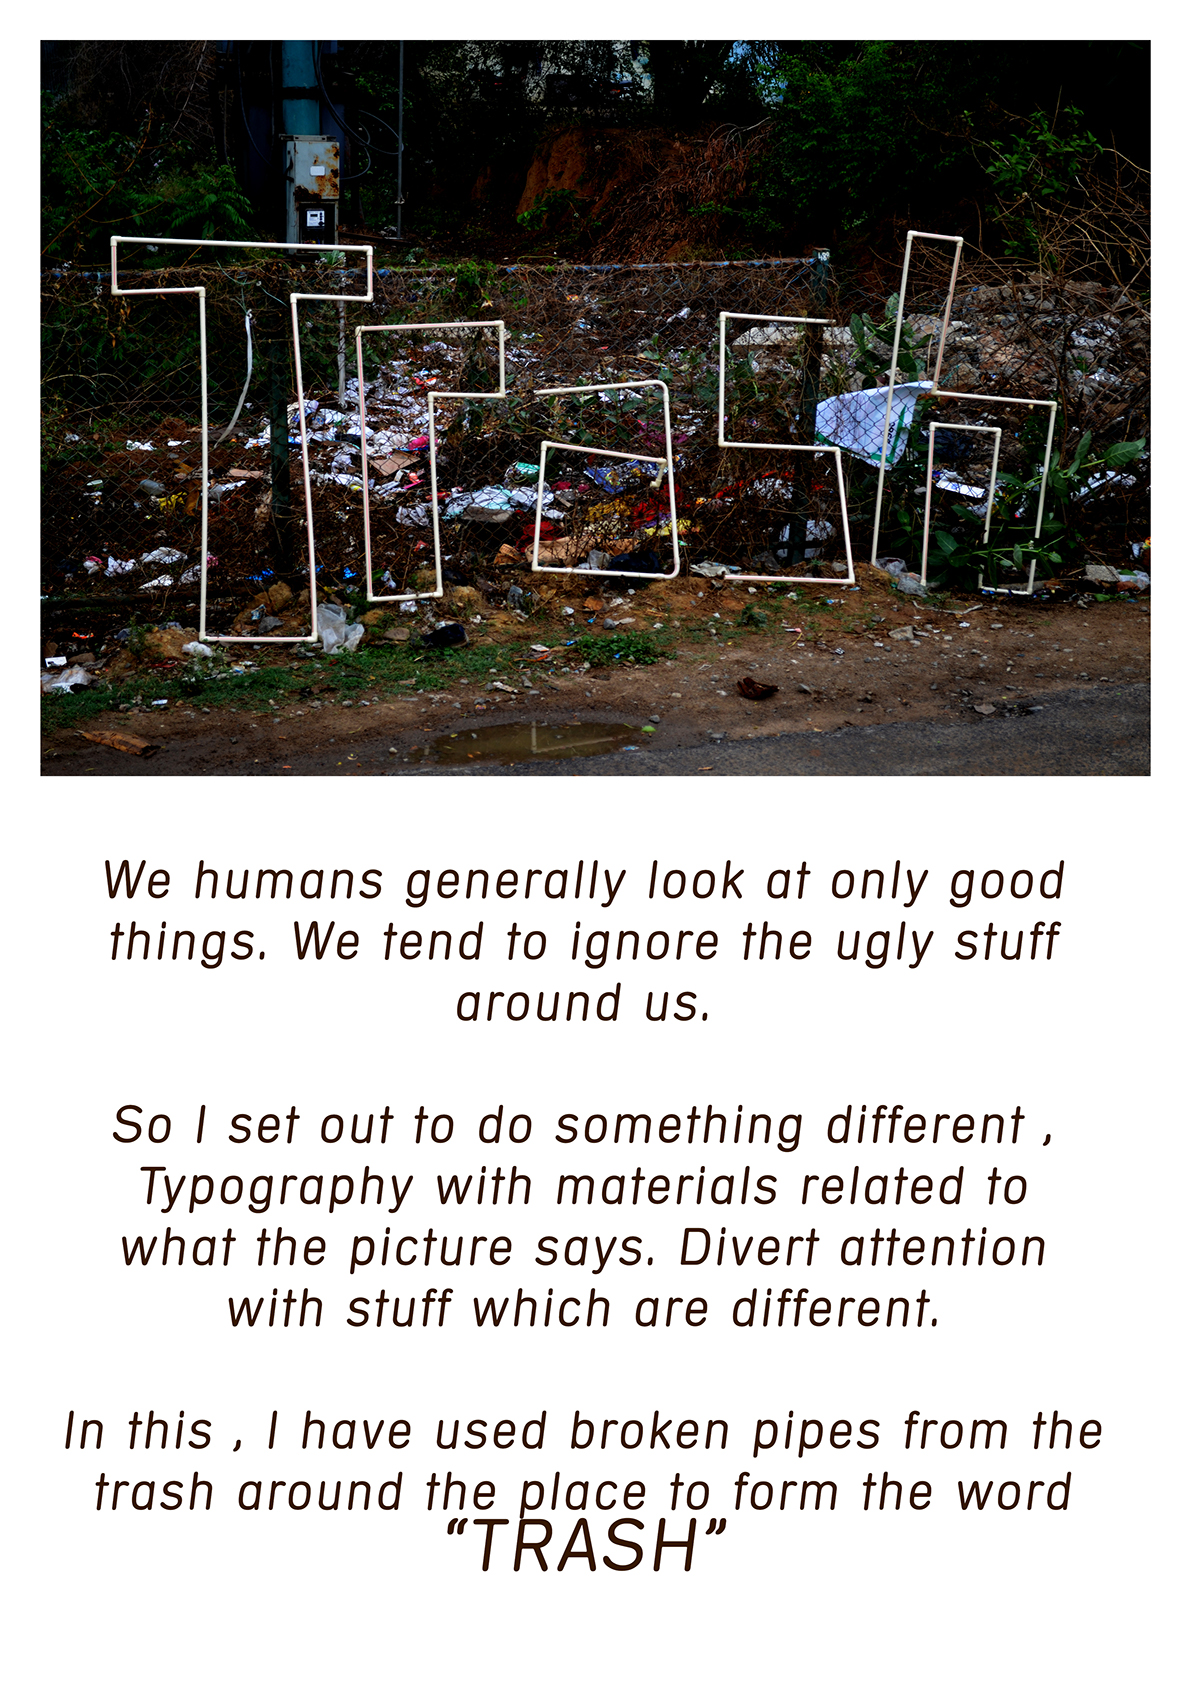 trash garbage Typeface Poverty clean dirty different bangalore India Student work art streets social Initiative city